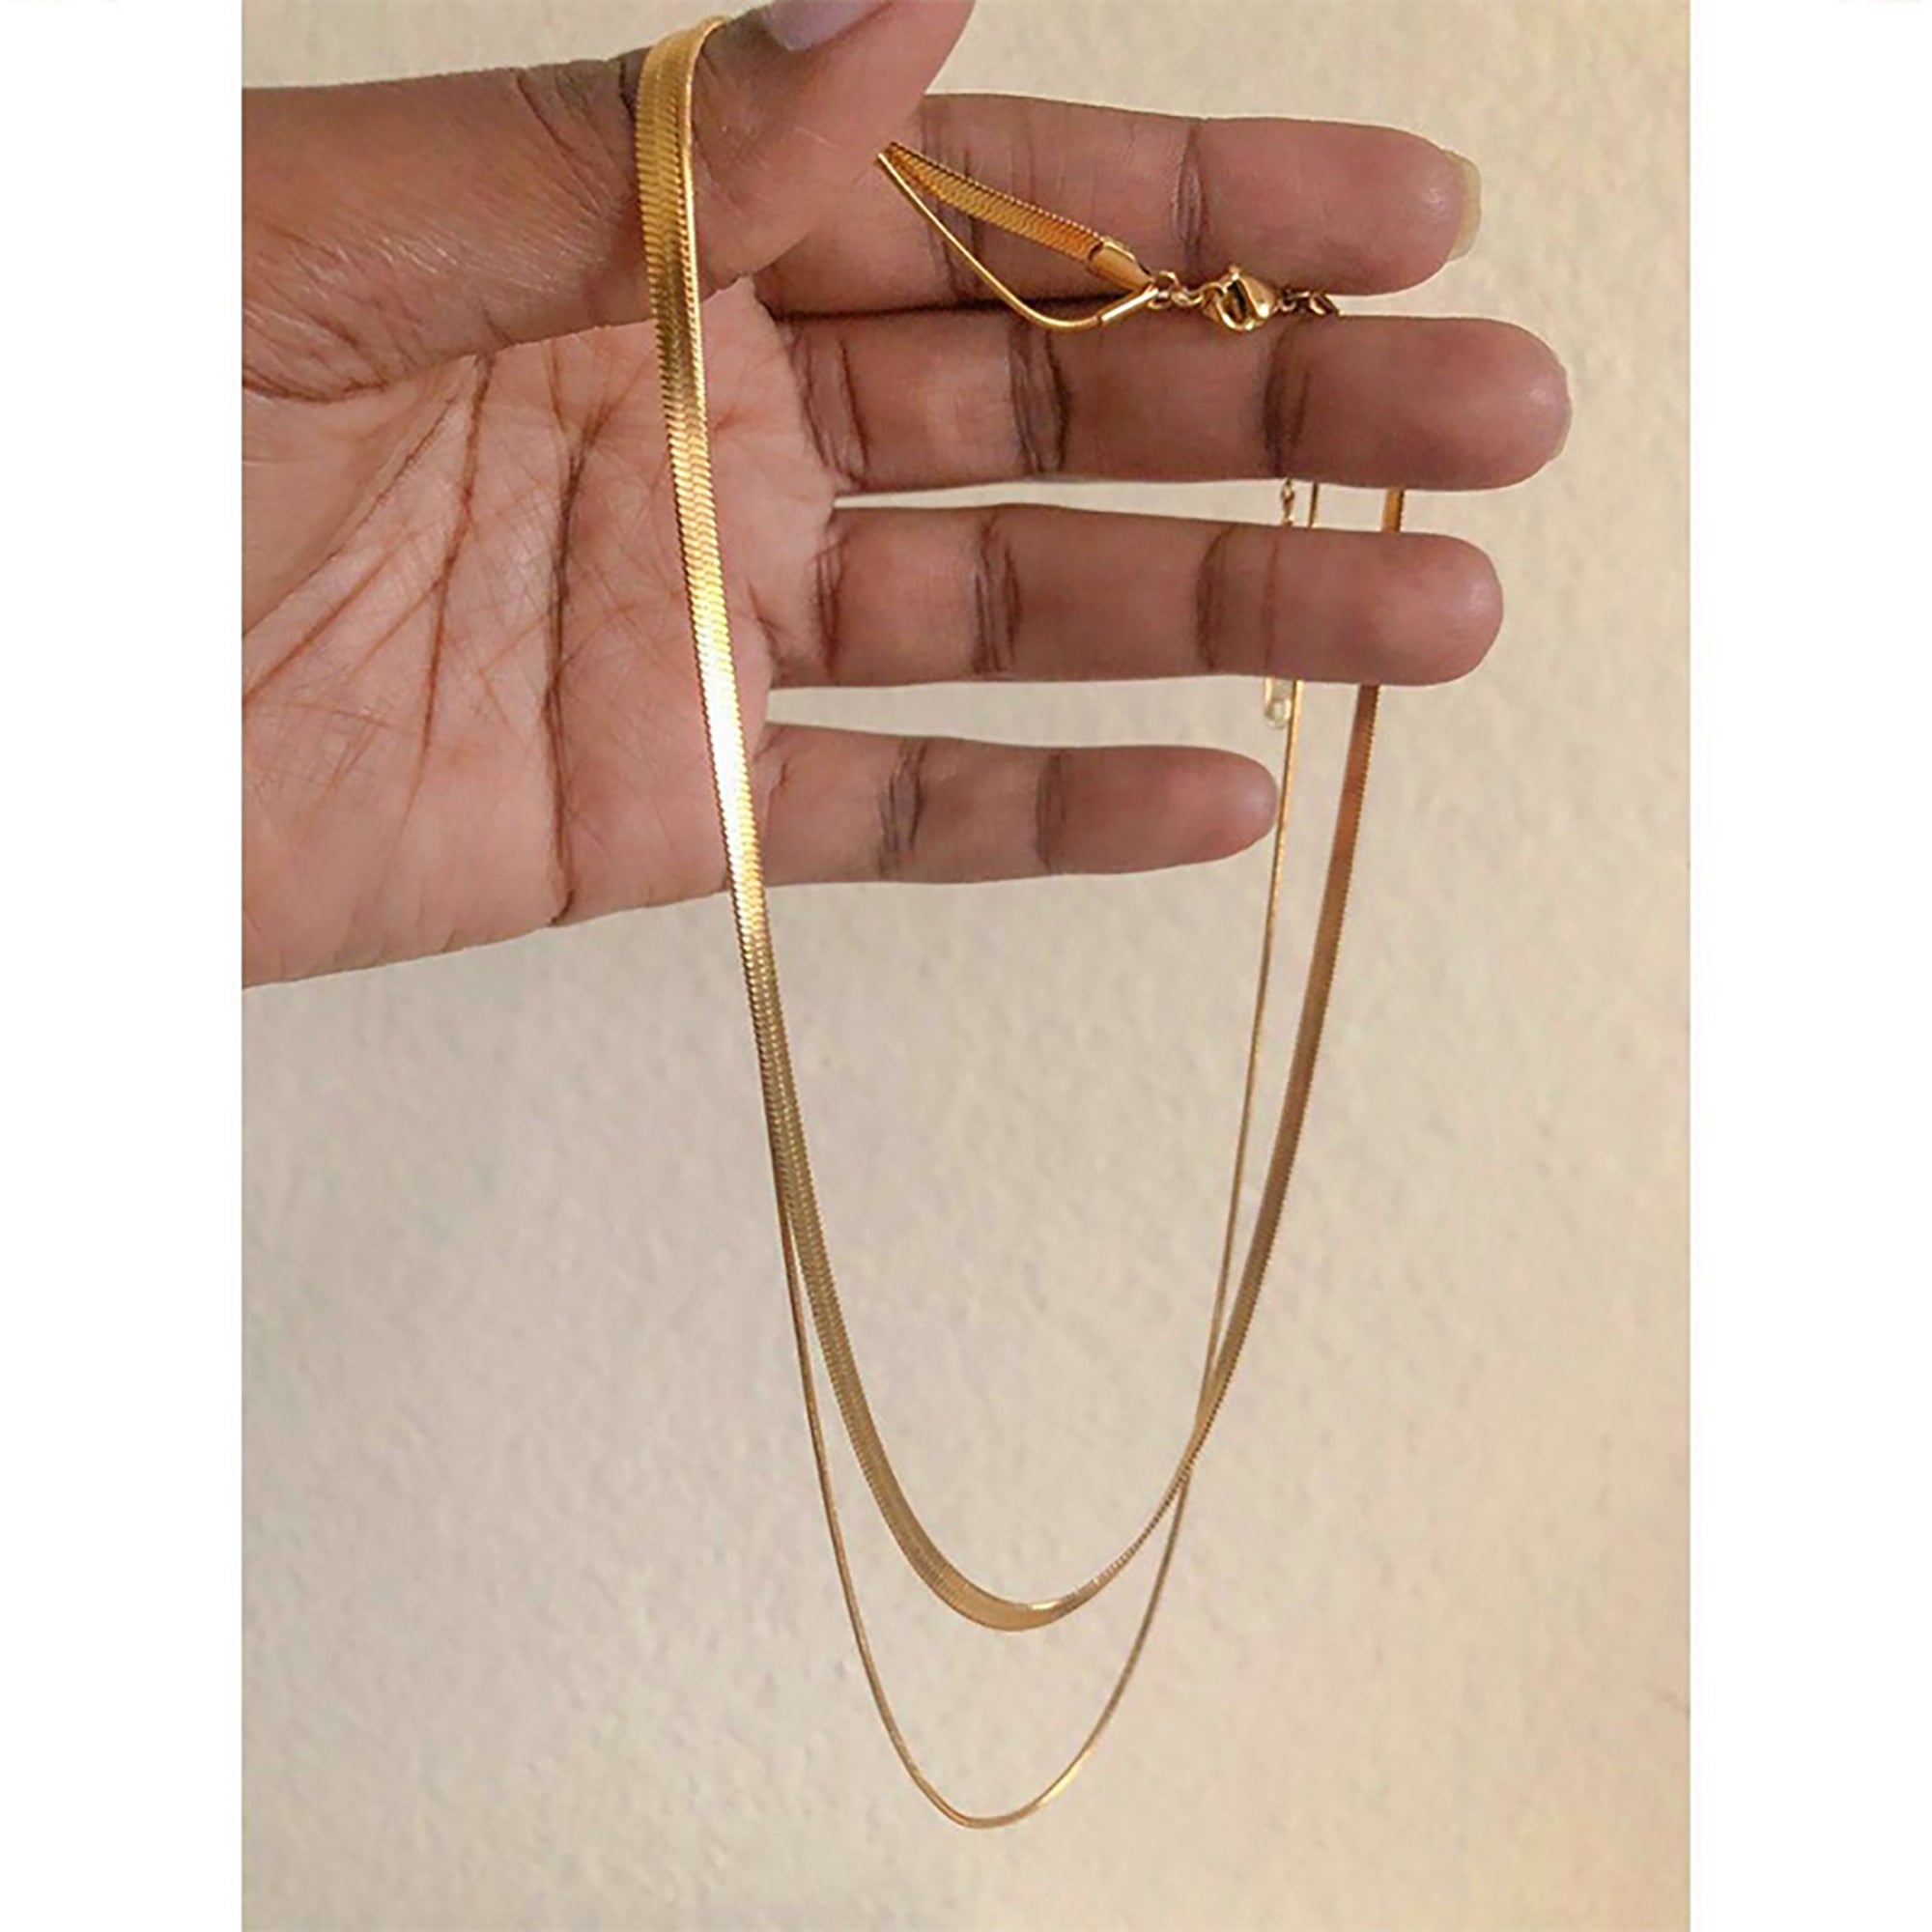 Gold Plated Layered Metal Chain Necklace Gift wedding influencer styling KOL / Youtuber / Celebrity / Fashion Icon picked